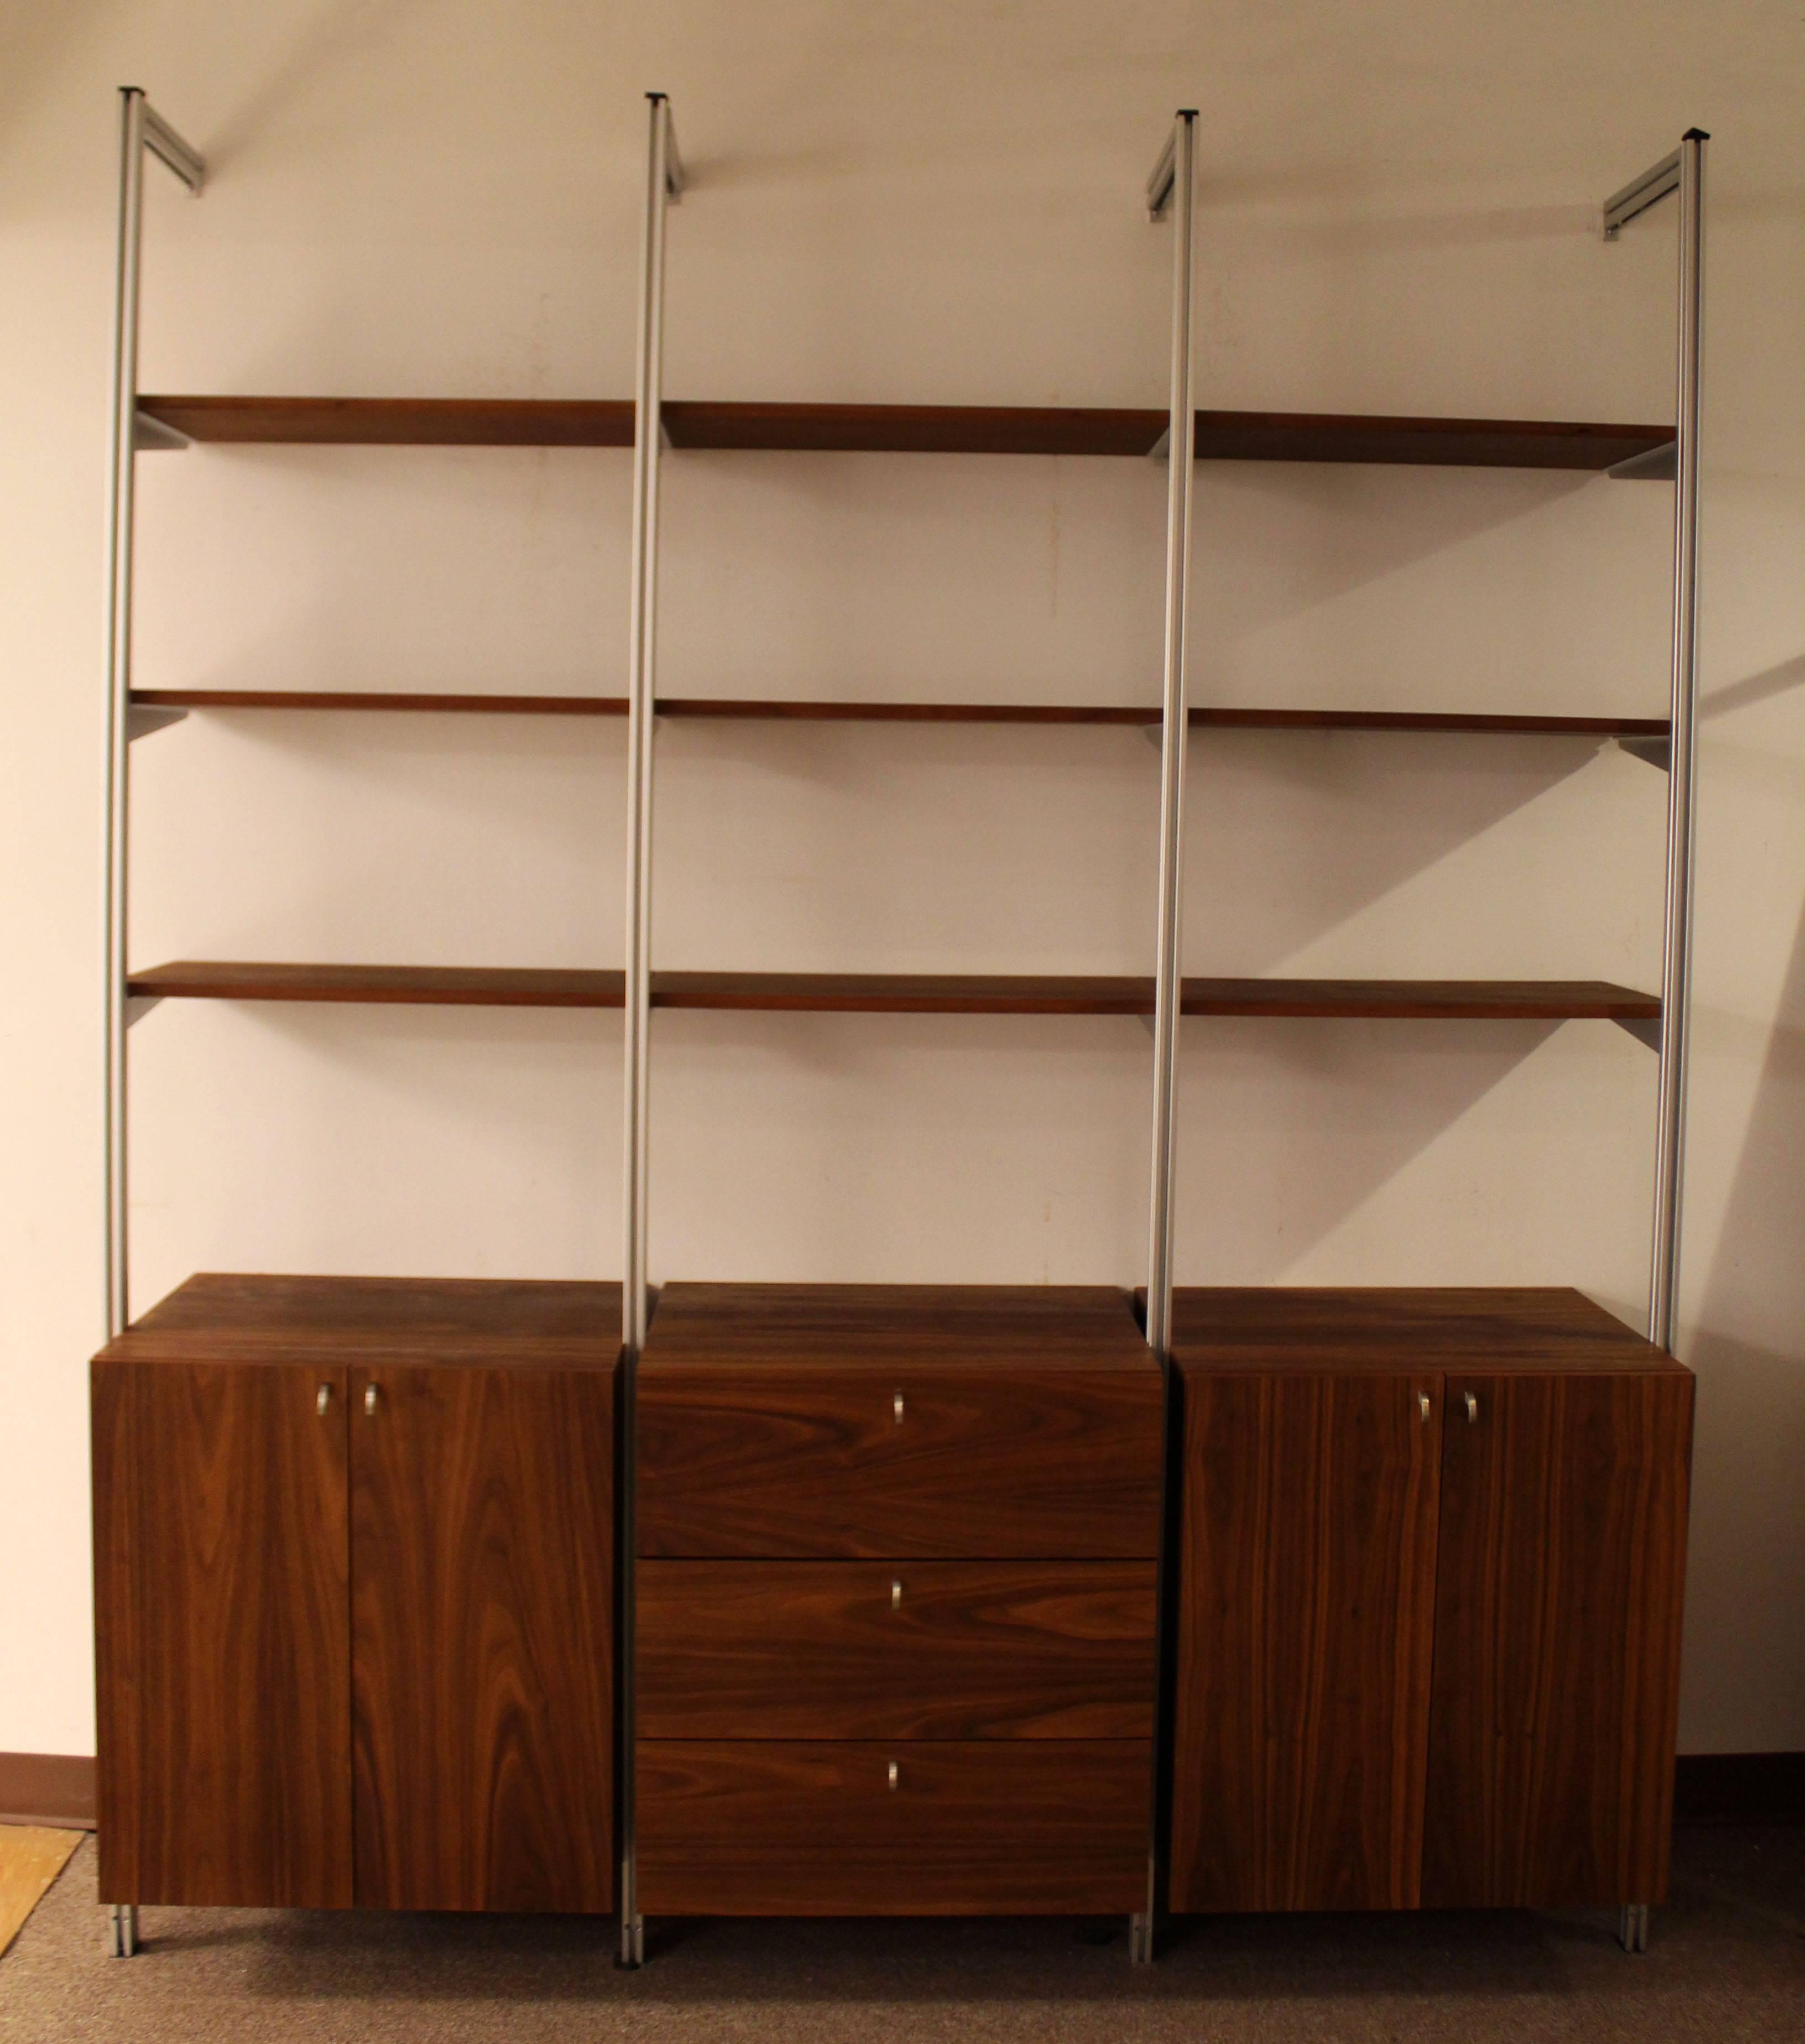 For your consideration is a fantastic, compact shelving system, with nine shelves, three drawers and two cabinets, attributed to George Nelson CSS system. In excellent condition. The dimensions are 76